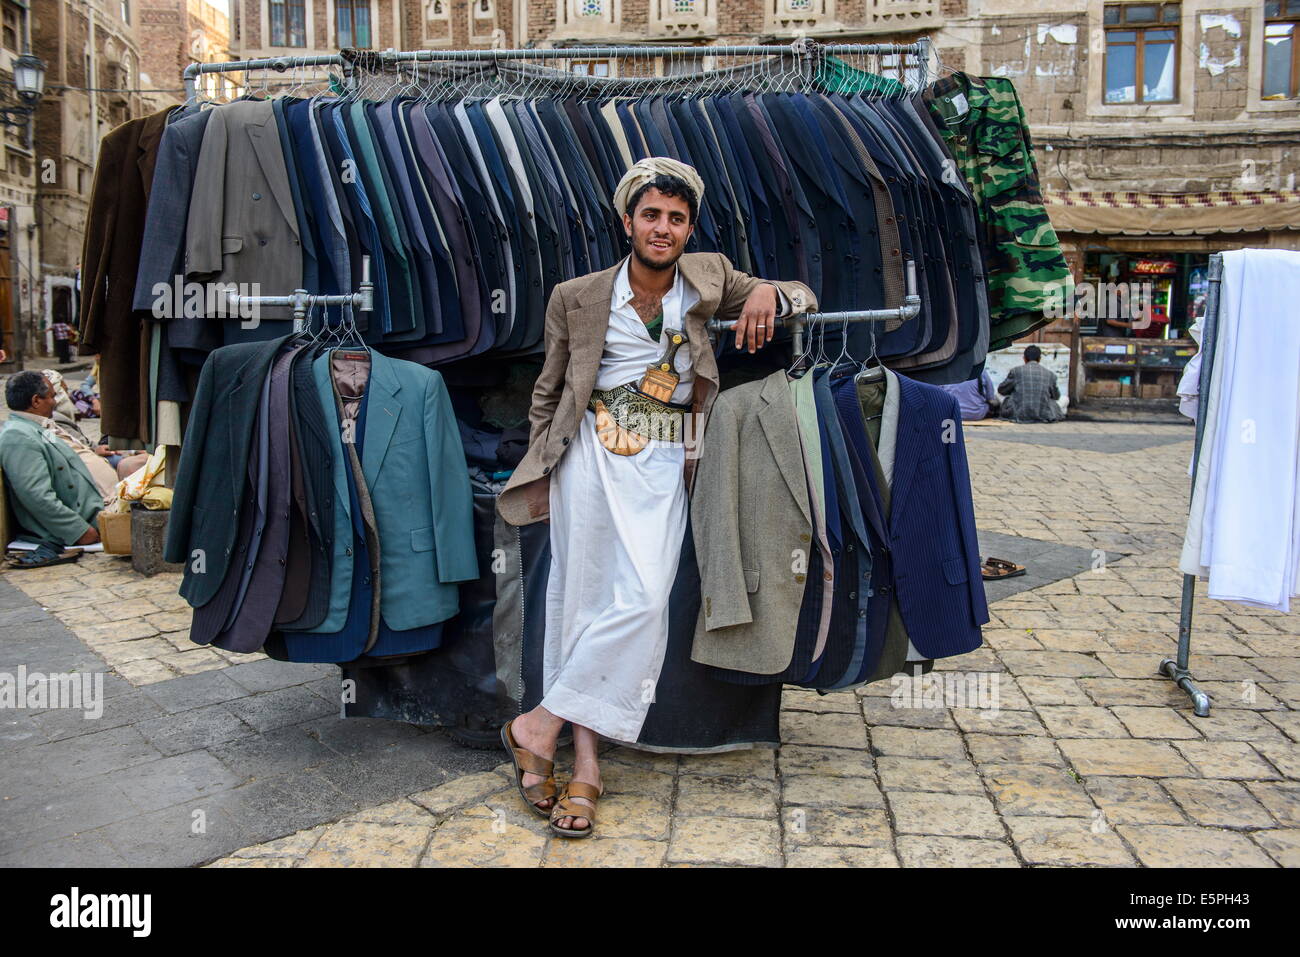 Man selling clothes in the Old Town, UNESCO World Heritage Site, Sanaa, Yemen, Middle East Stock Photo